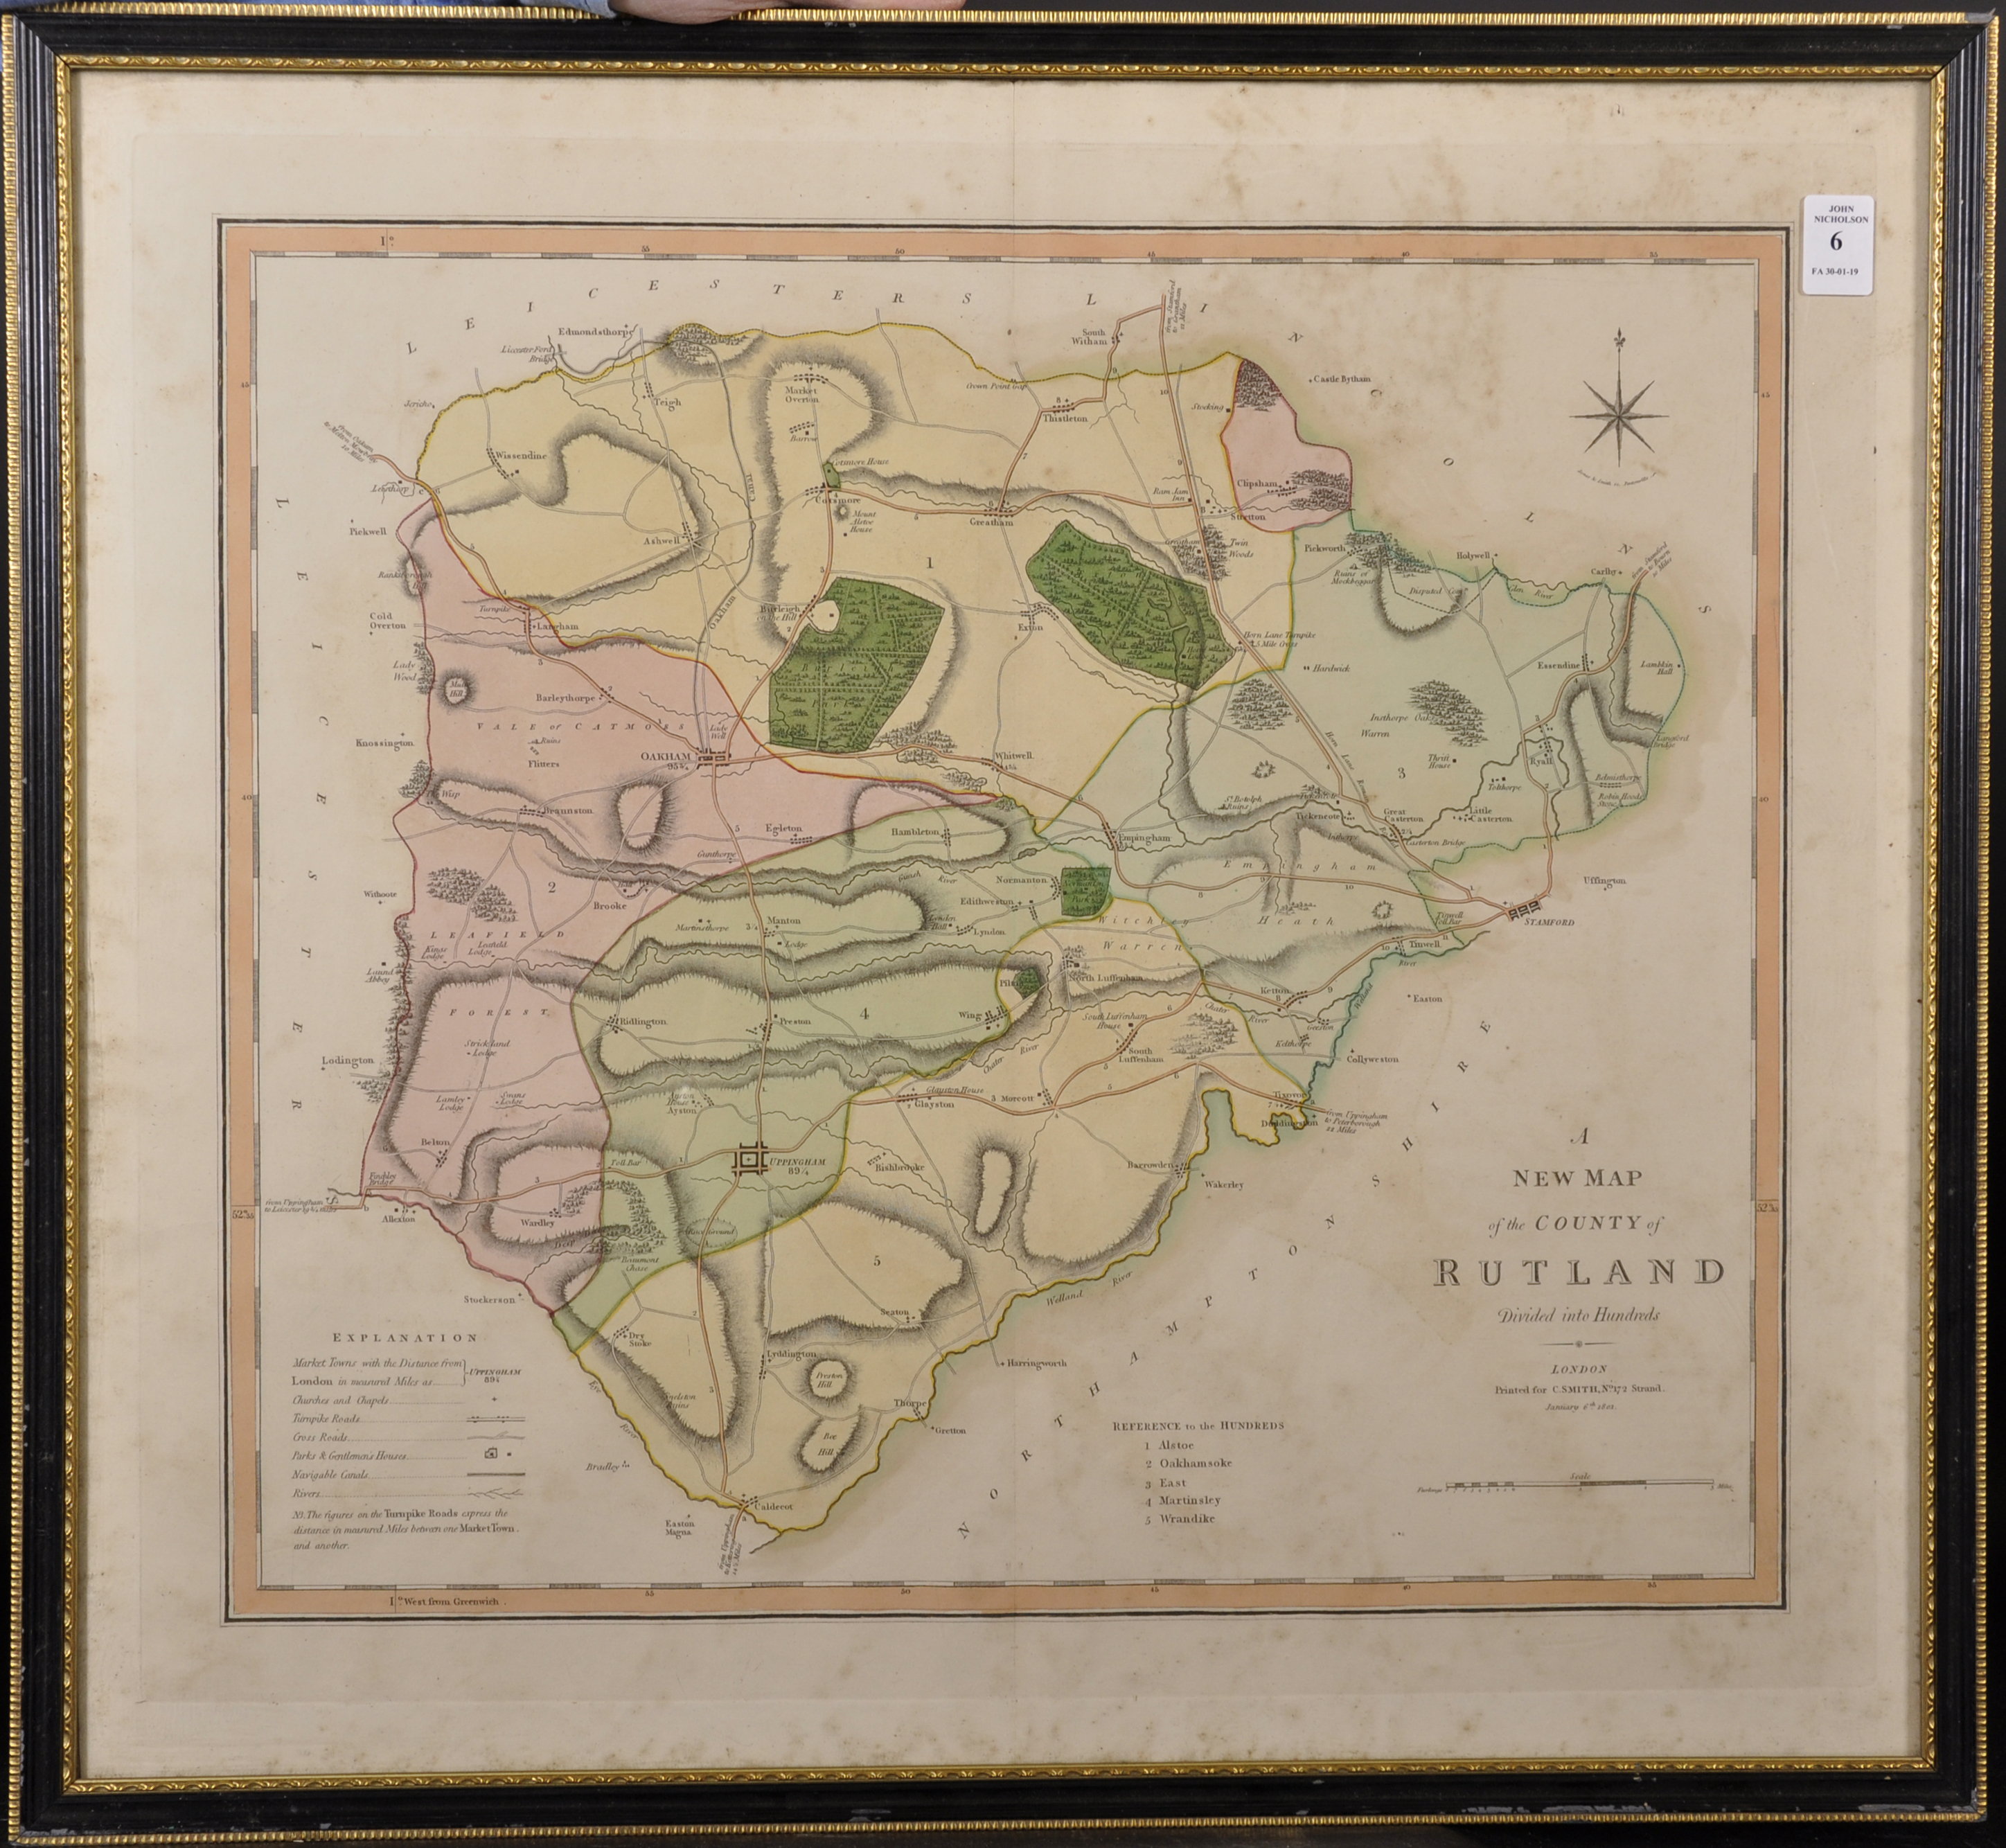 Charles Smith (18th-19th Century) British. "A New Map of the County of Rutland", 1801, Engraved Map, - Image 2 of 4